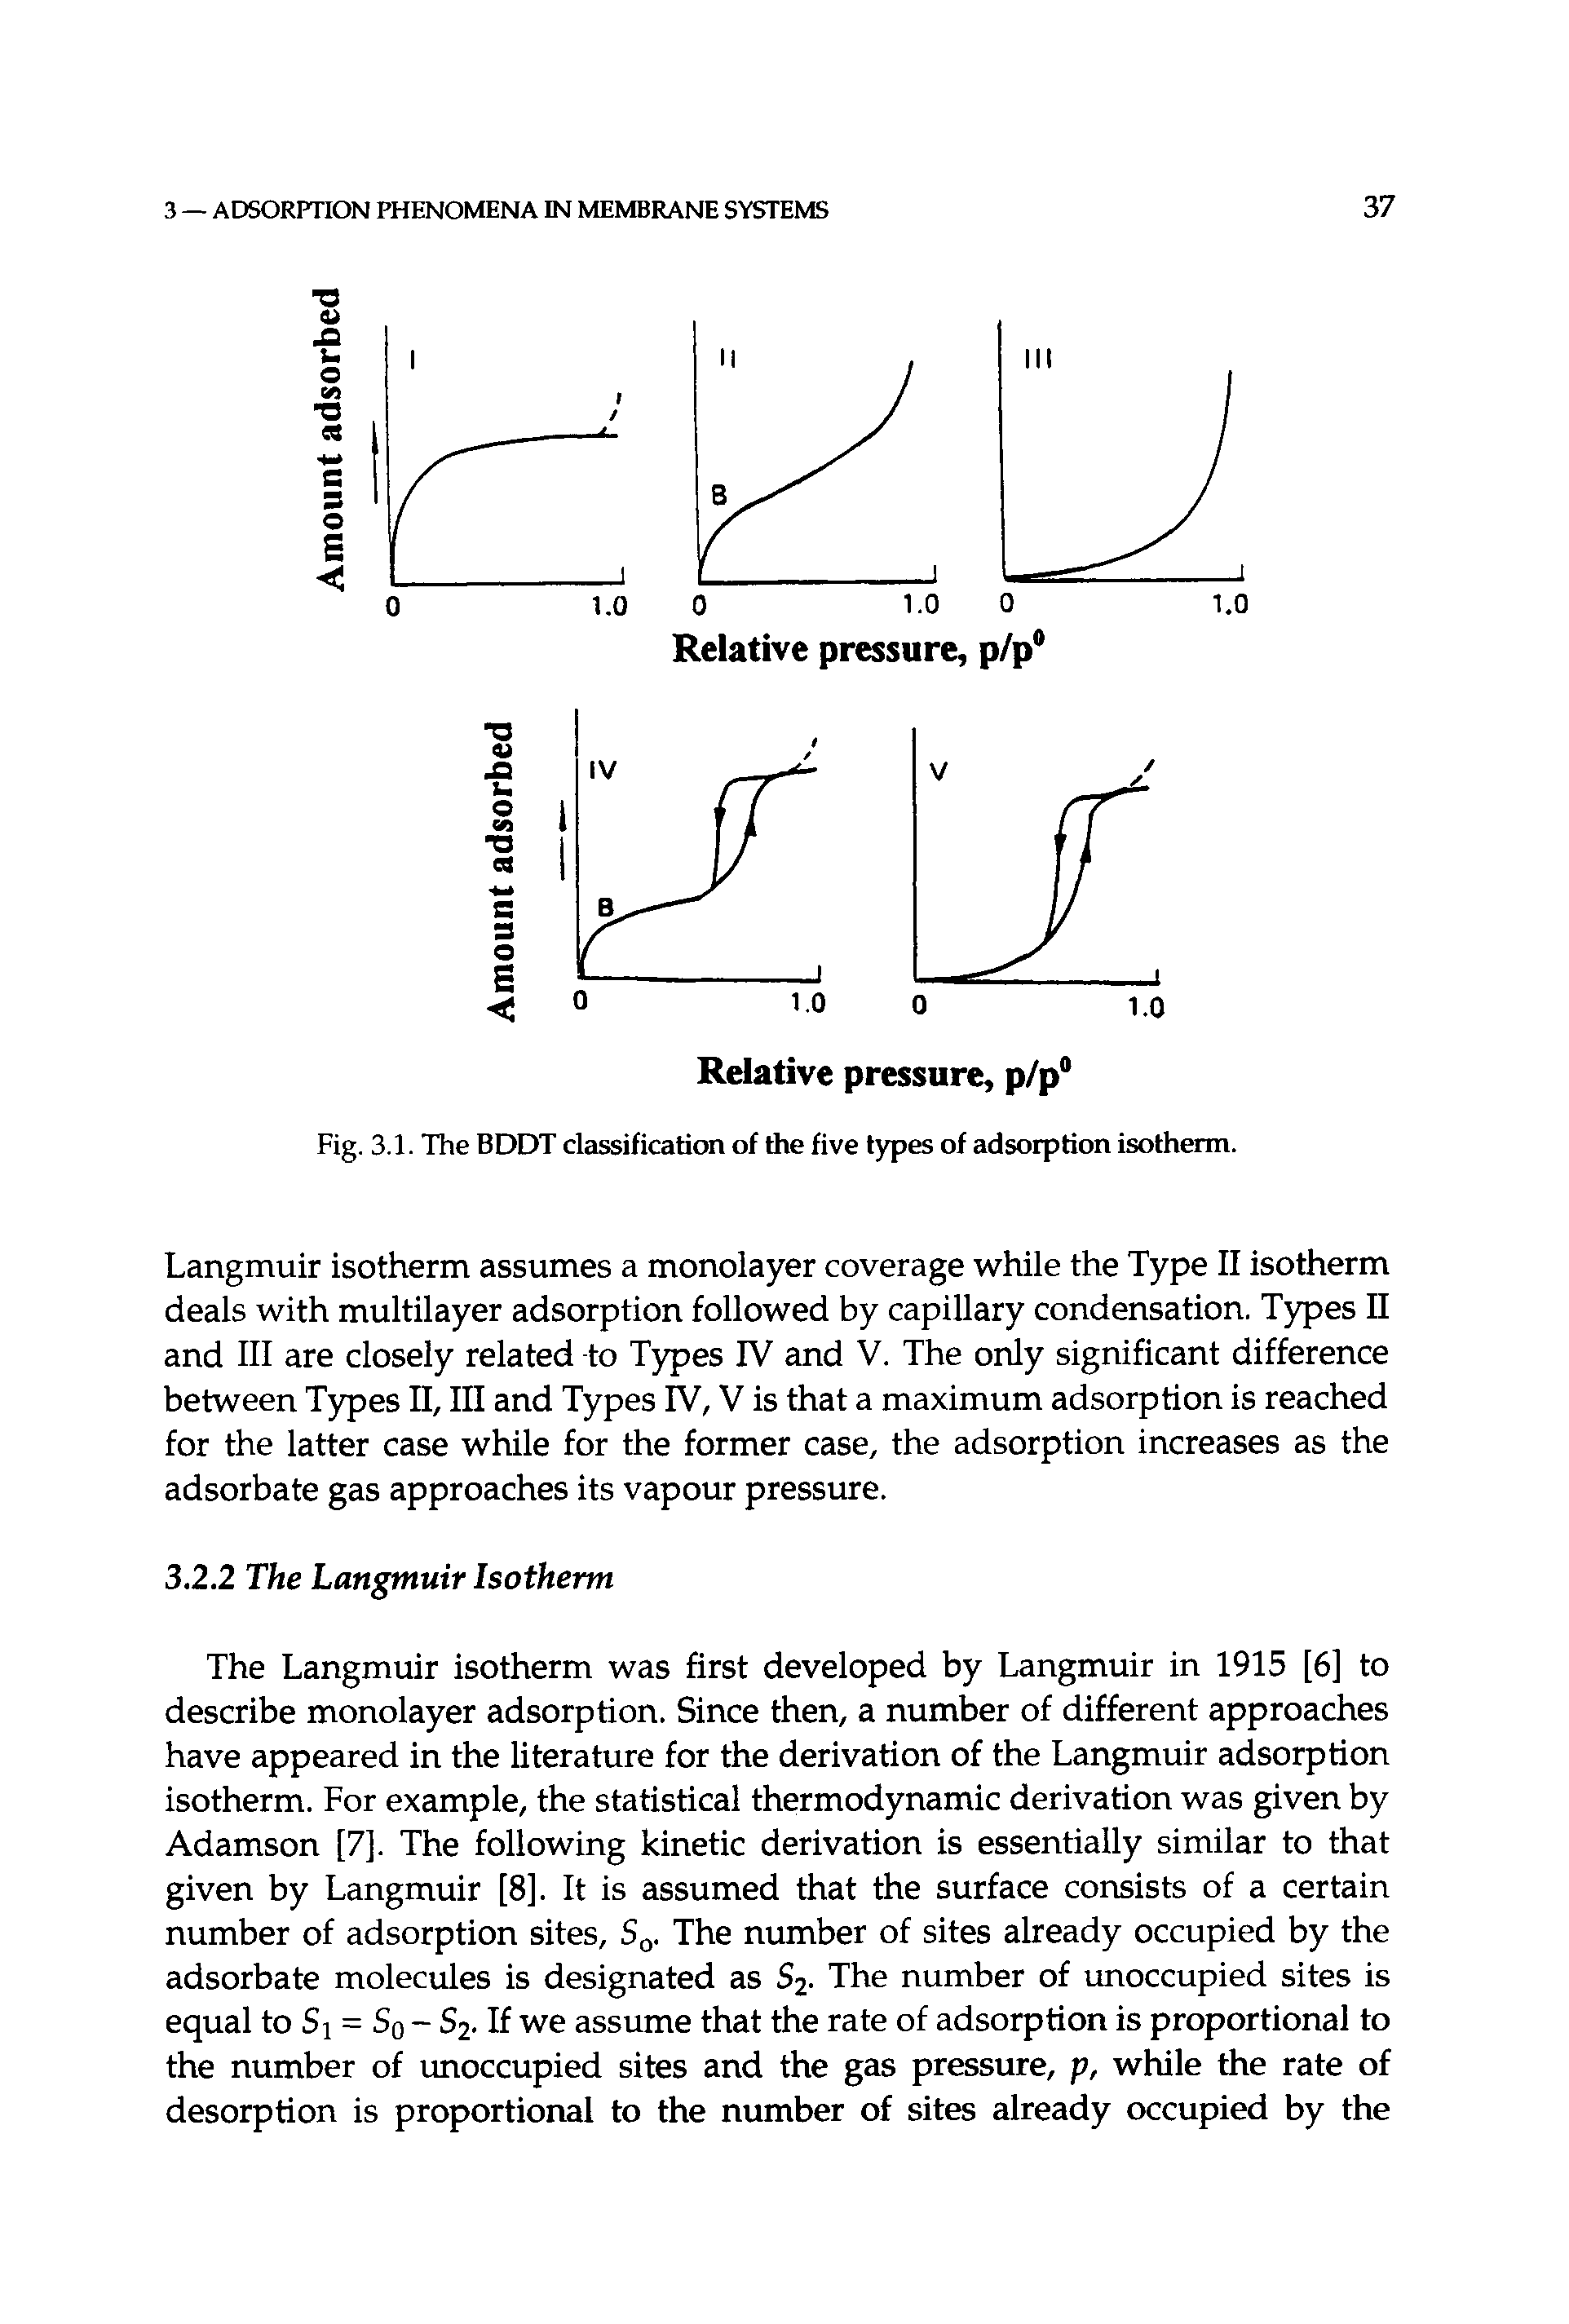 Fig. 3.1. The BDDT classification of the five types of adsorption isotherm.